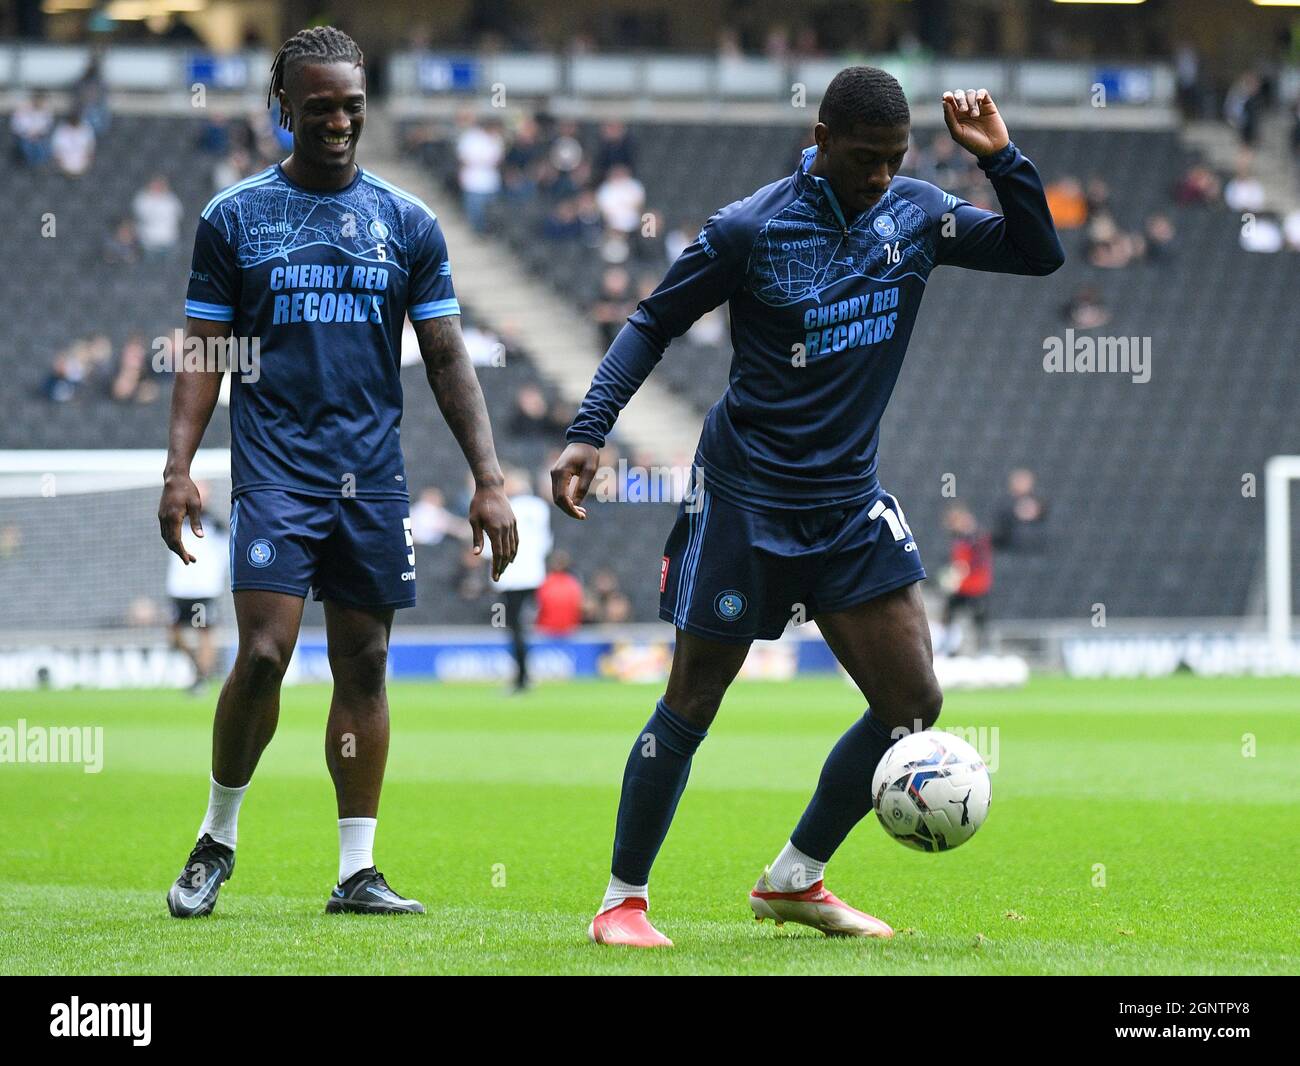 MILTON KEYNES, ENGLAND - SEPTEMBER 25, 2021: Anthony Kelvin Stewart of Wycombe (L) and Sulaiman Borbor Kaikai of Wycombe (R) pictured ahead of the 2021/22 SkyBet EFL League One matchweek 9 game between MK Dons FC and Wycombe Wanderers FC at Stadium MK. Copyright: Cosmin Iftode/Picstaff Stock Photo